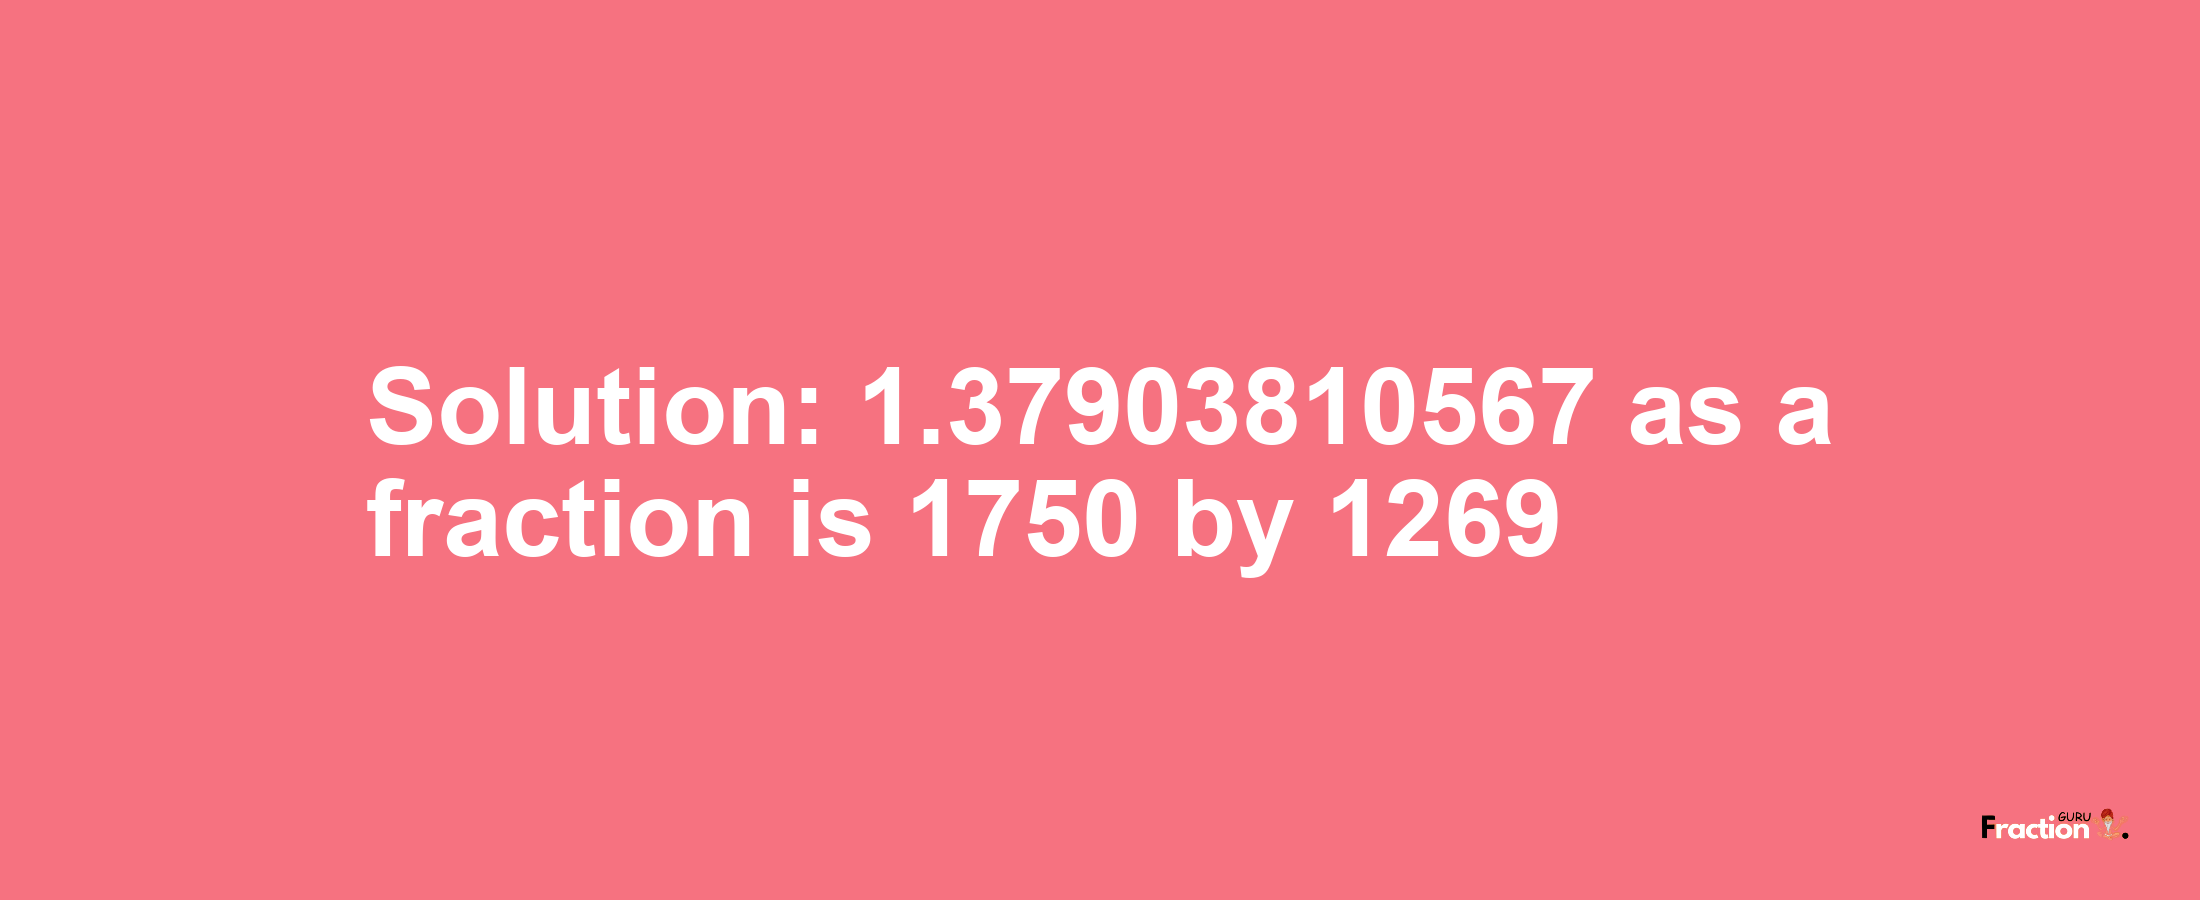 Solution:1.37903810567 as a fraction is 1750/1269